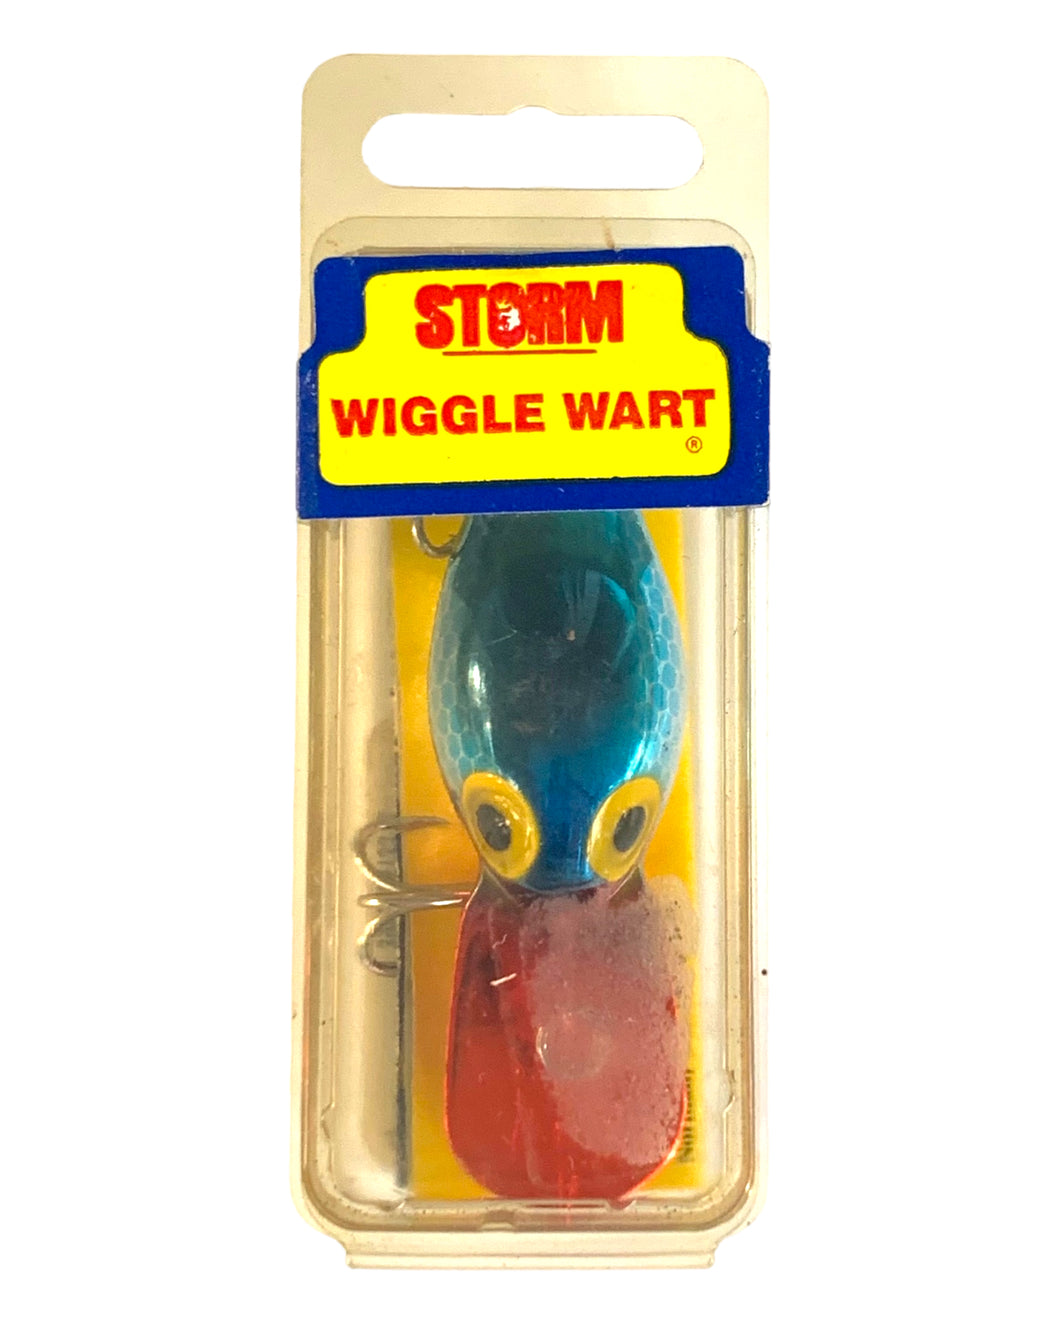 Front View of STORM LURES WIGGLE WART Fishing Lure in METALLIC BLUE SCALE with RED LIP. Available Online at Toad Tackle.